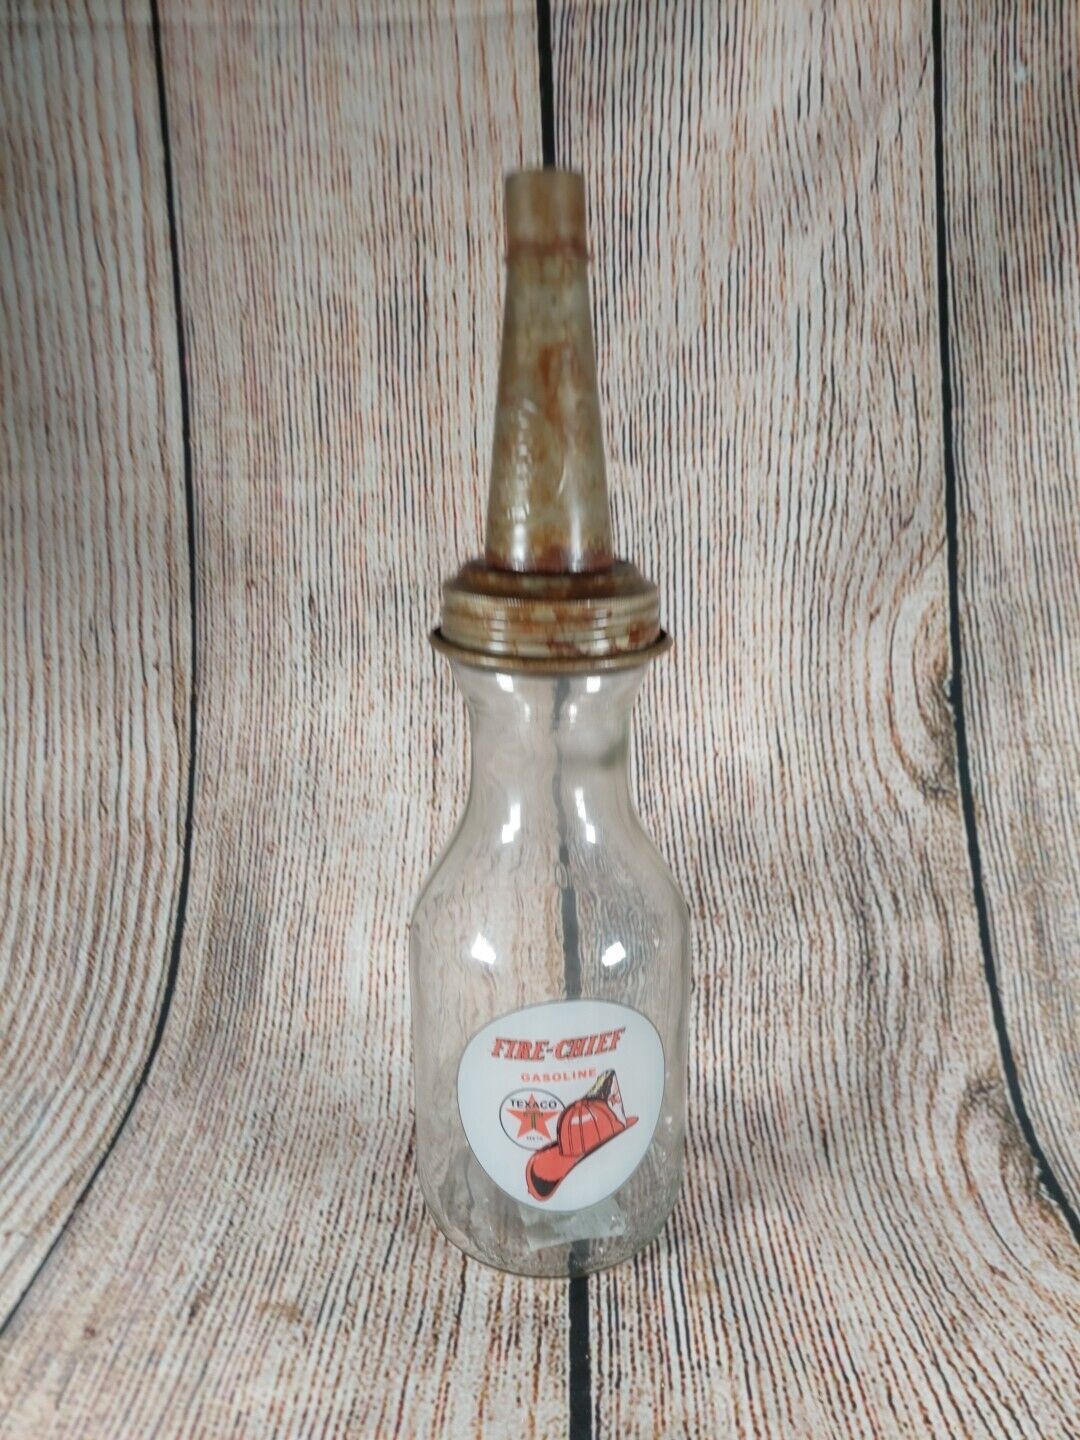 Texaco Fire Chief Antique Reproduction Glass Oil Jar